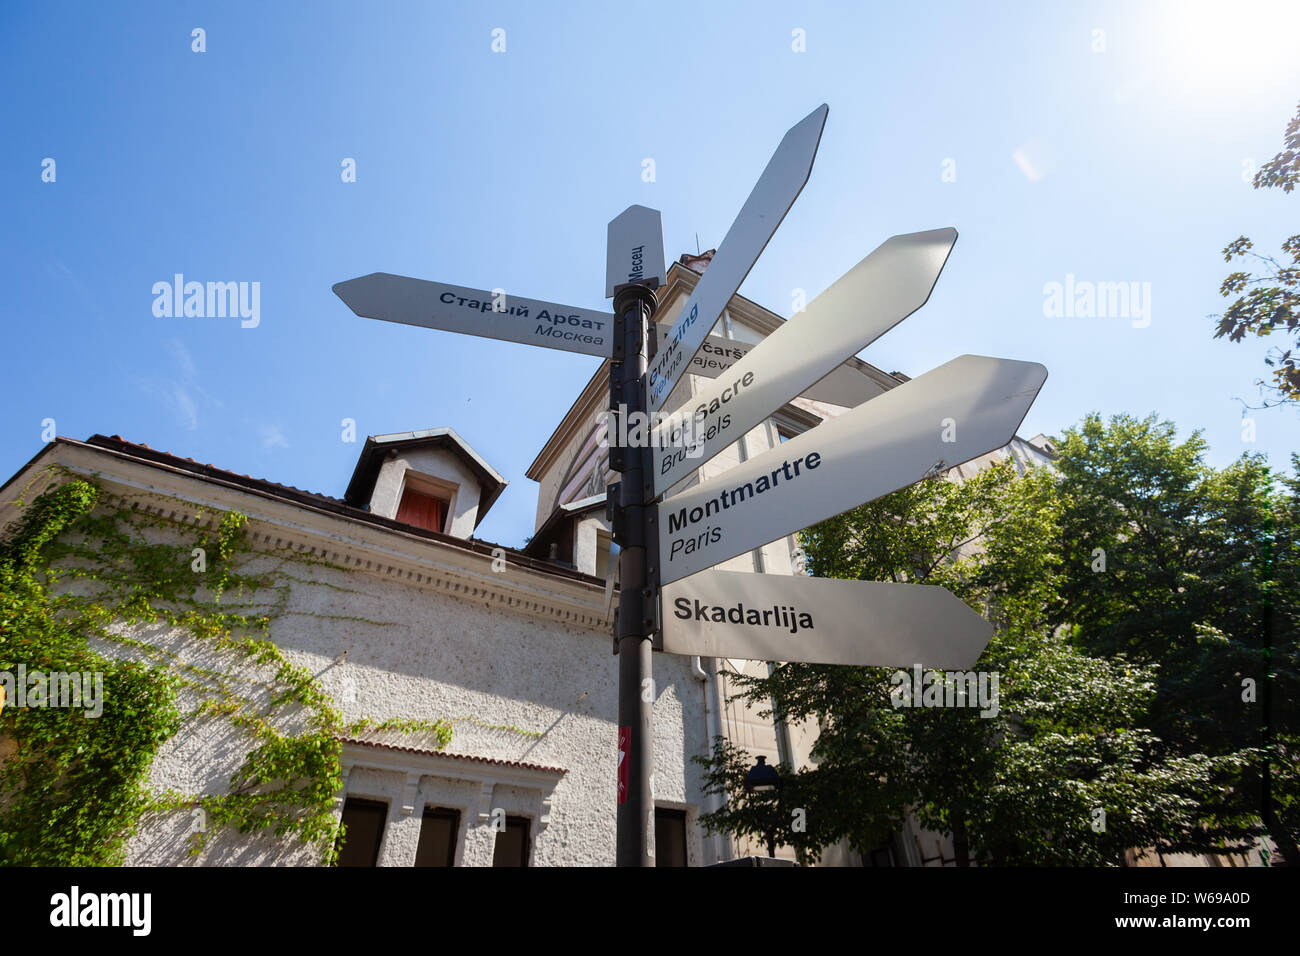 Signpost in Skadarlija, Belgrade pointing to the Bohemian districts of various cities Stock Photo